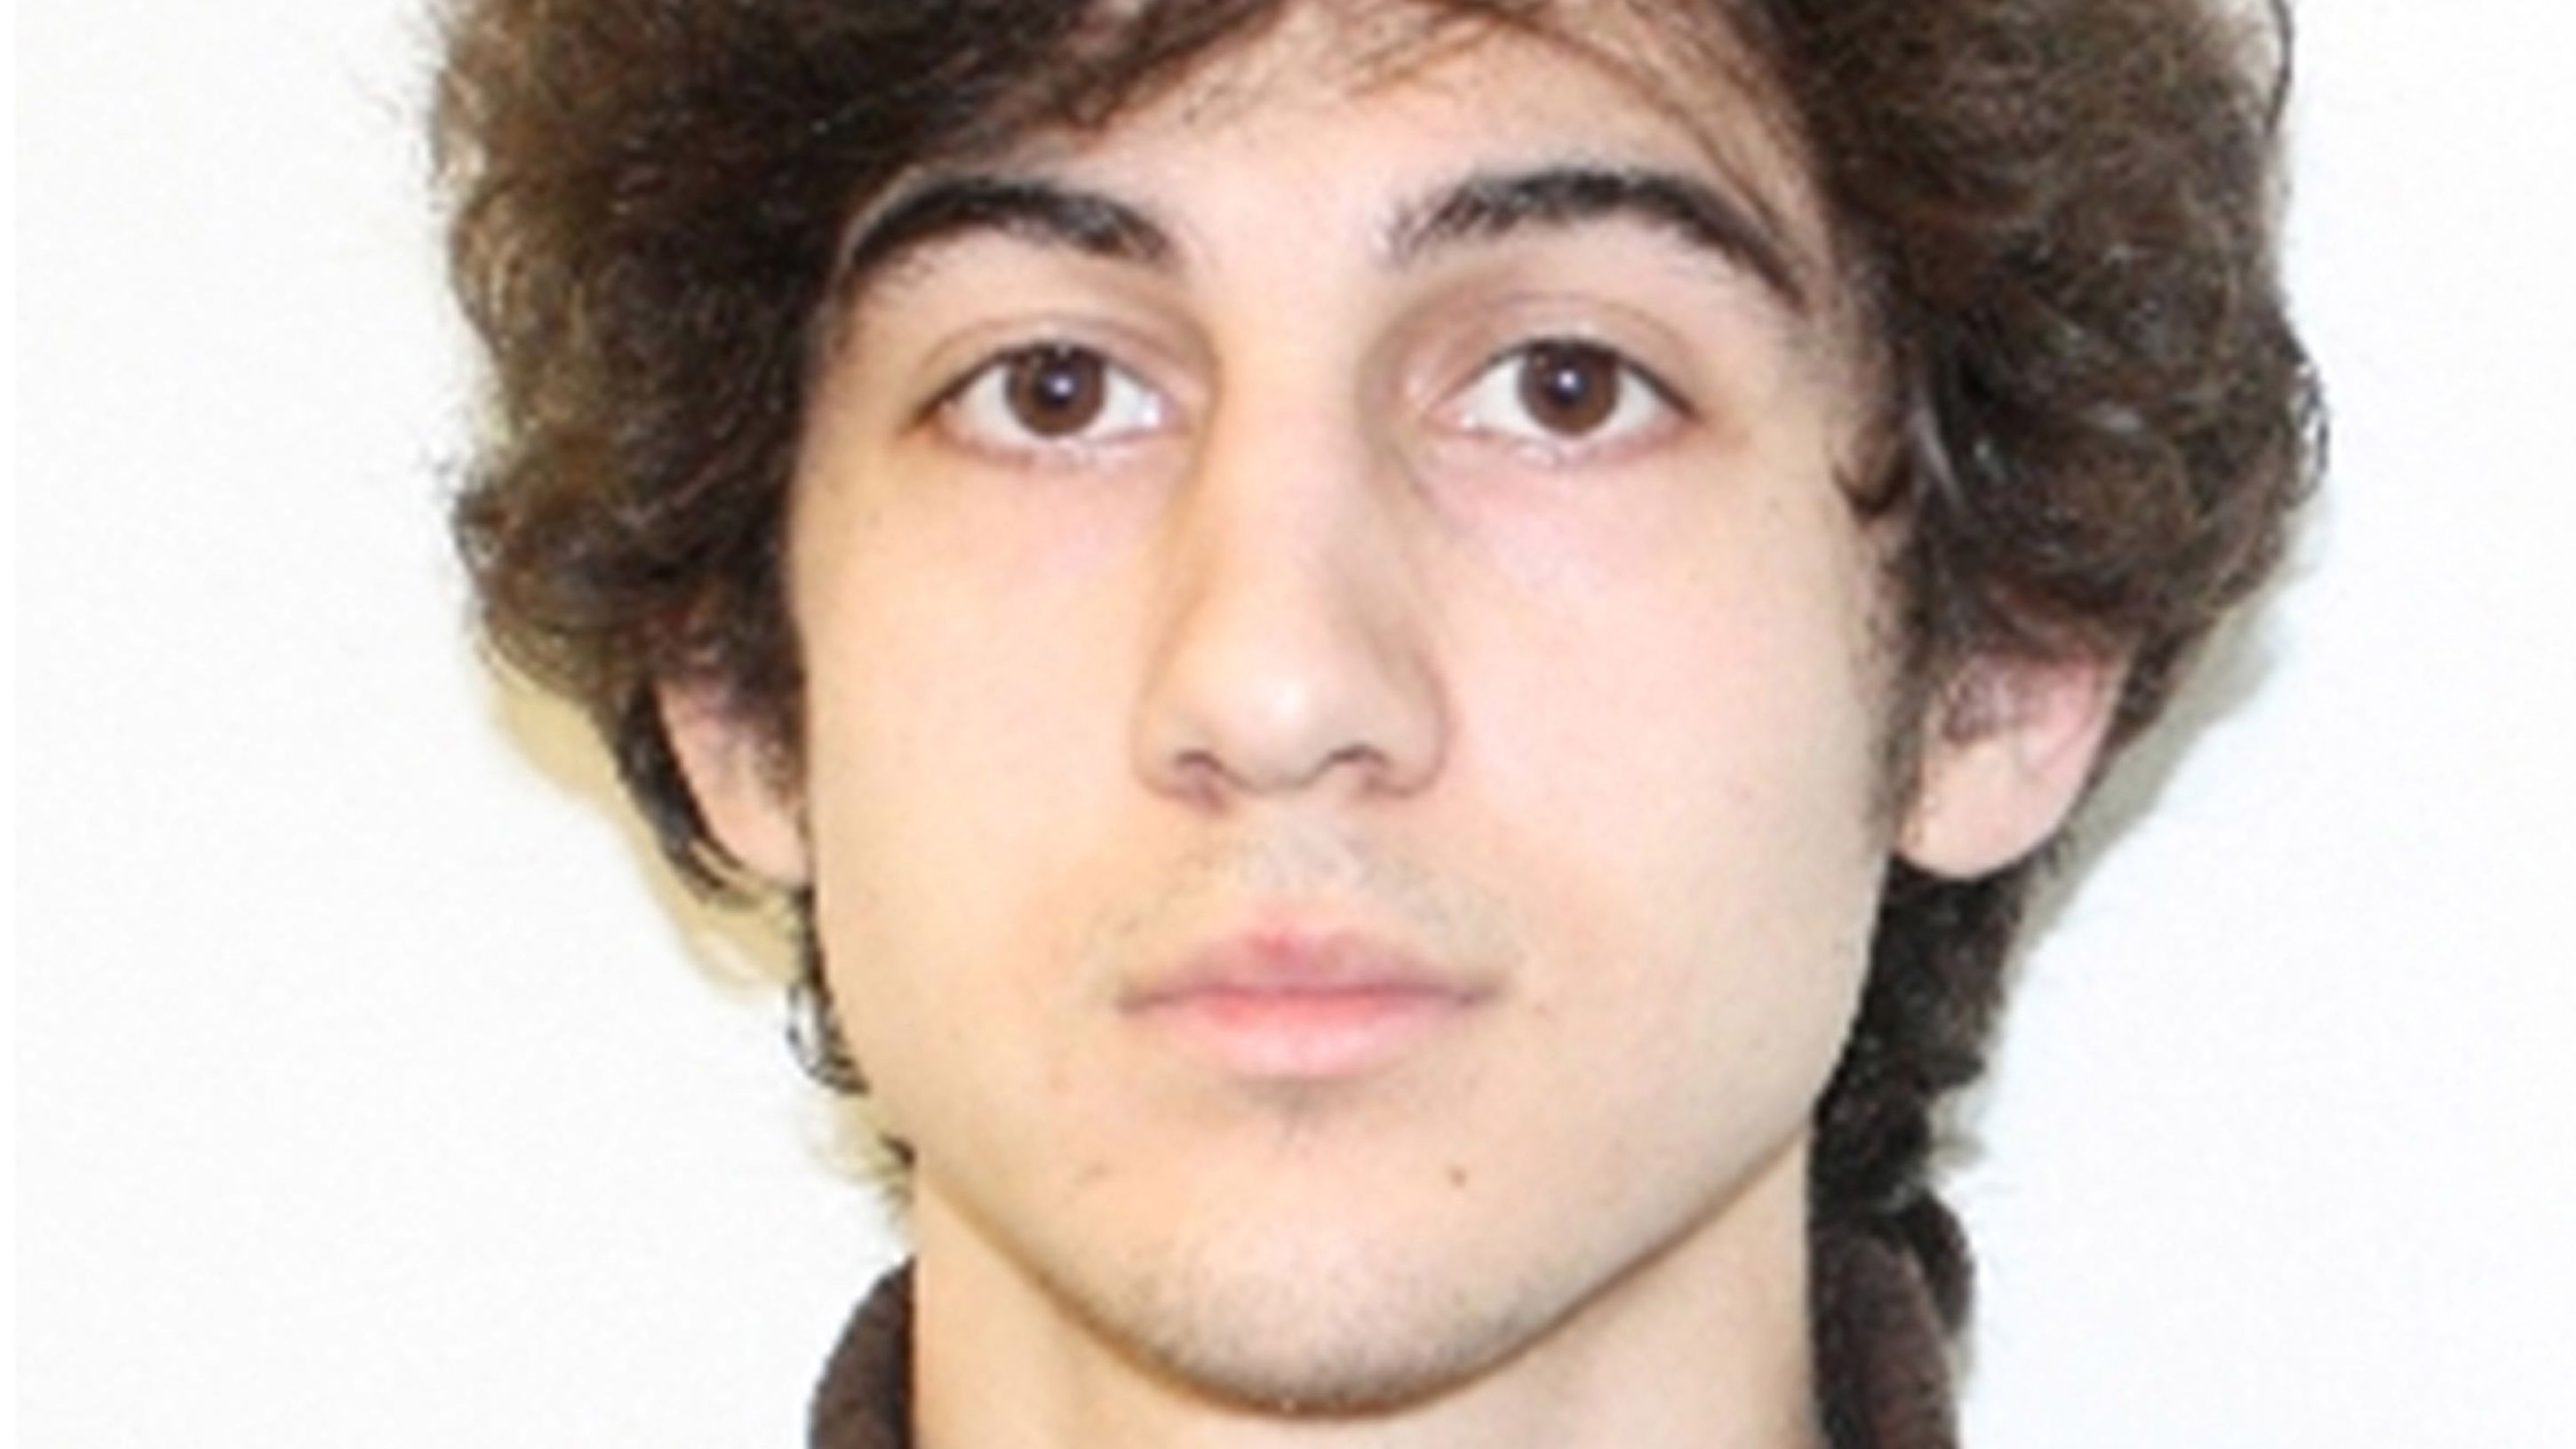 <a href="https://www.cnn.com/2013/06/03/us/boston-marathon-terror-attack-fast-facts/index.html" target="_blank">Dzhokhar Tsarnaev</a> was given a death sentence for the April 2013 double bombings near the finish line of the Boston Marathon. The bombings killed three people and injured more than 260.